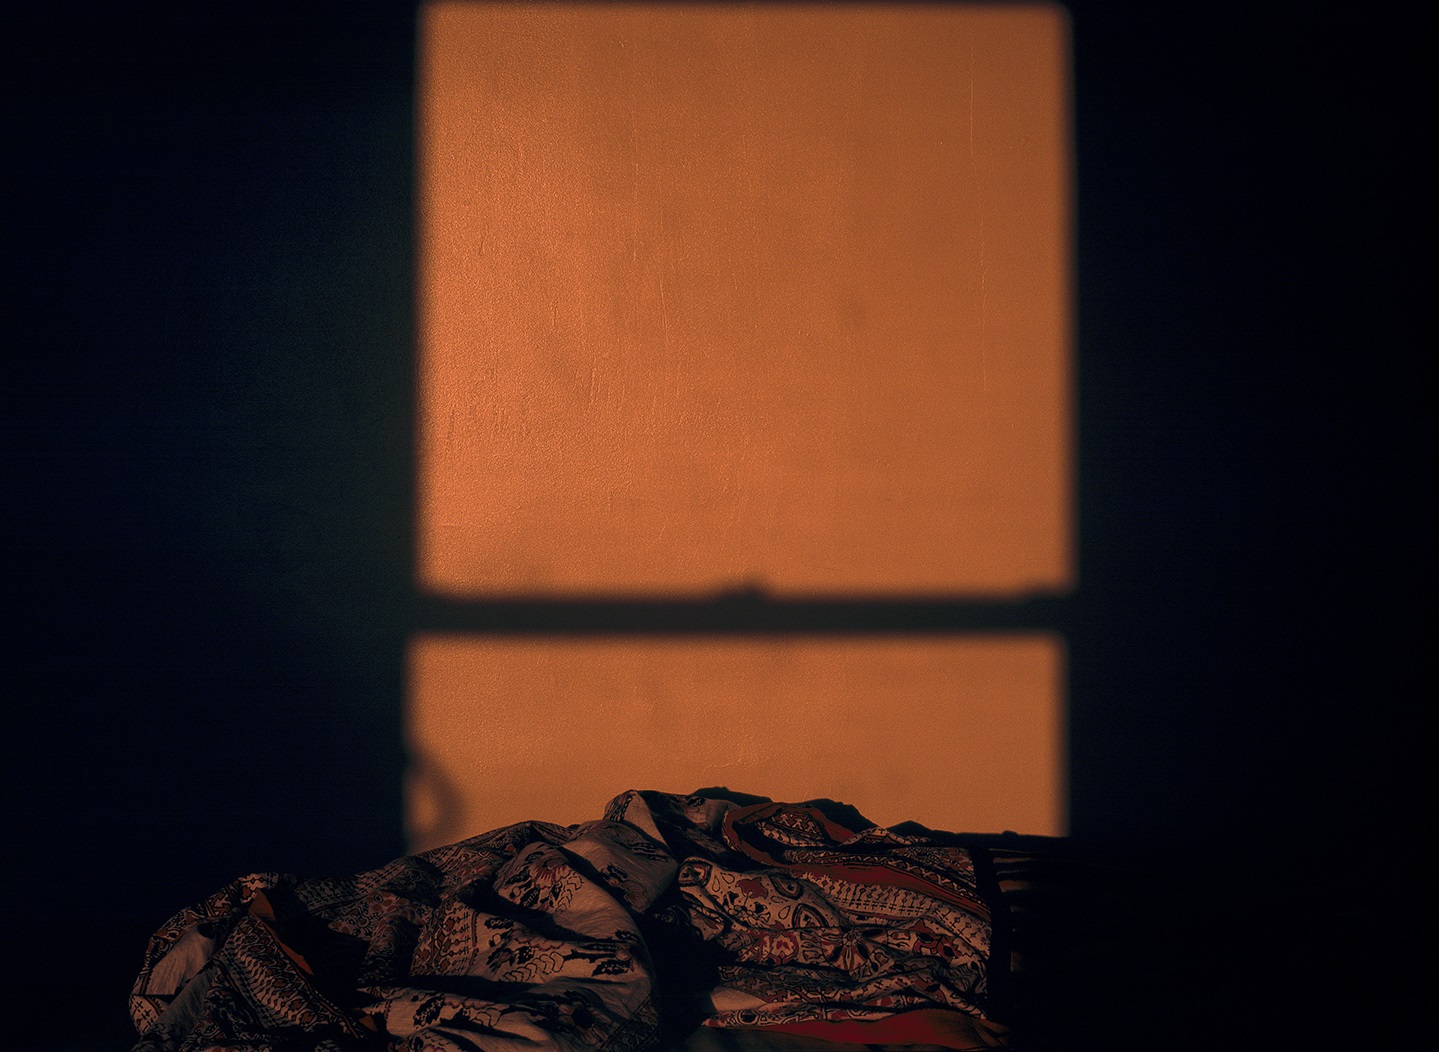 A patterned throw in a rumpled heap in a dark room, a split window of light throwing an orange wall into sharp relief between borders of shadow.